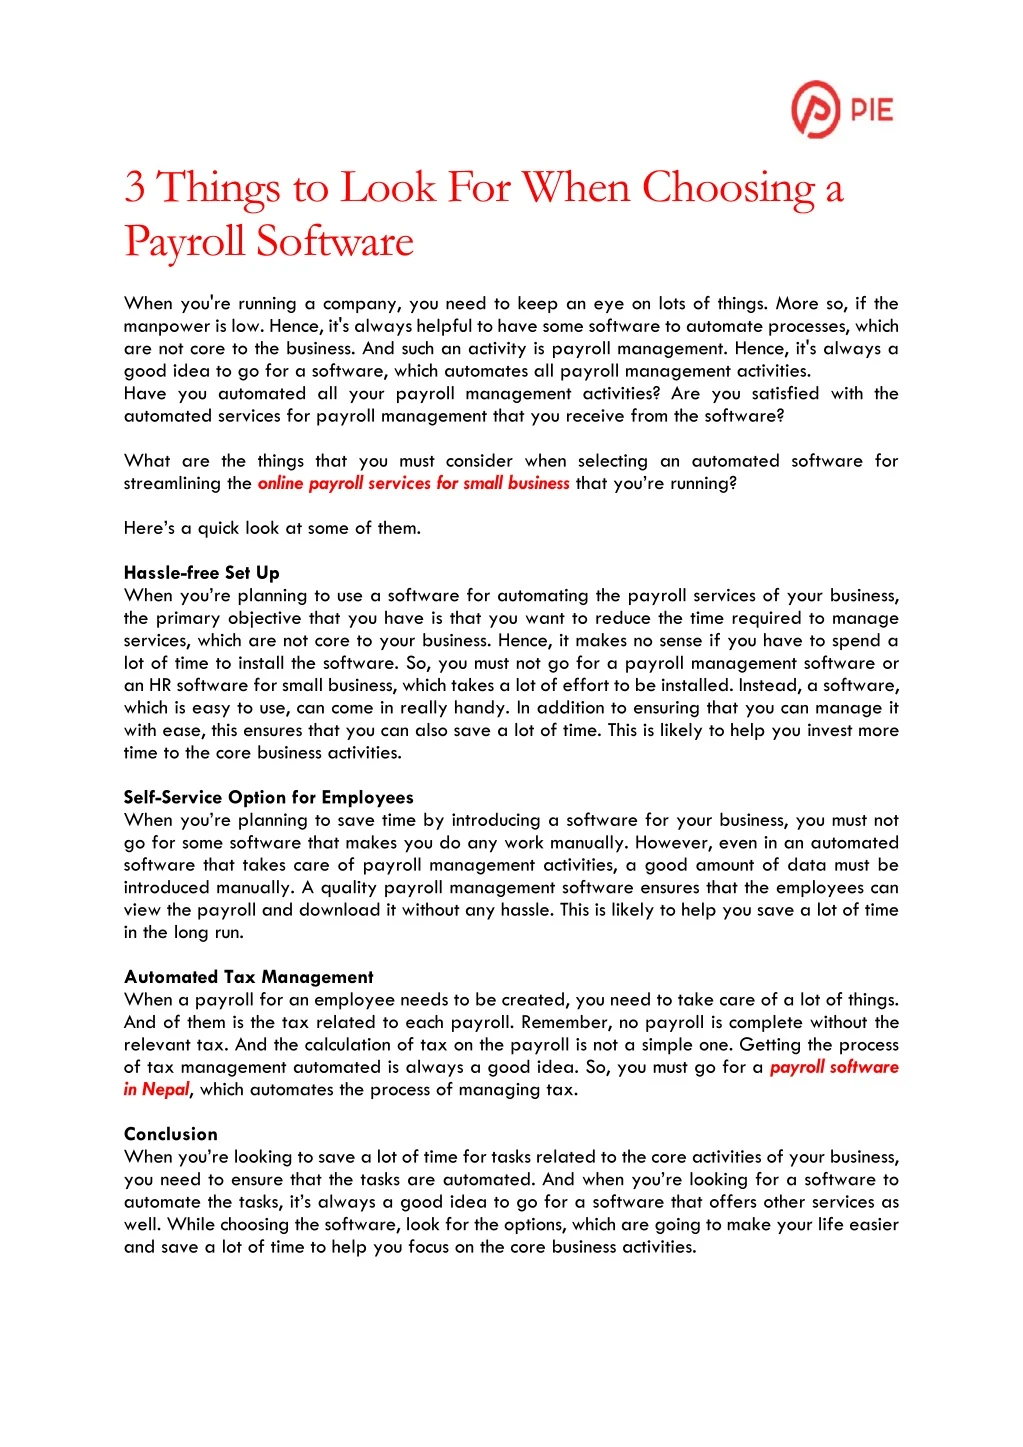 3 things to look for when choosing a payroll